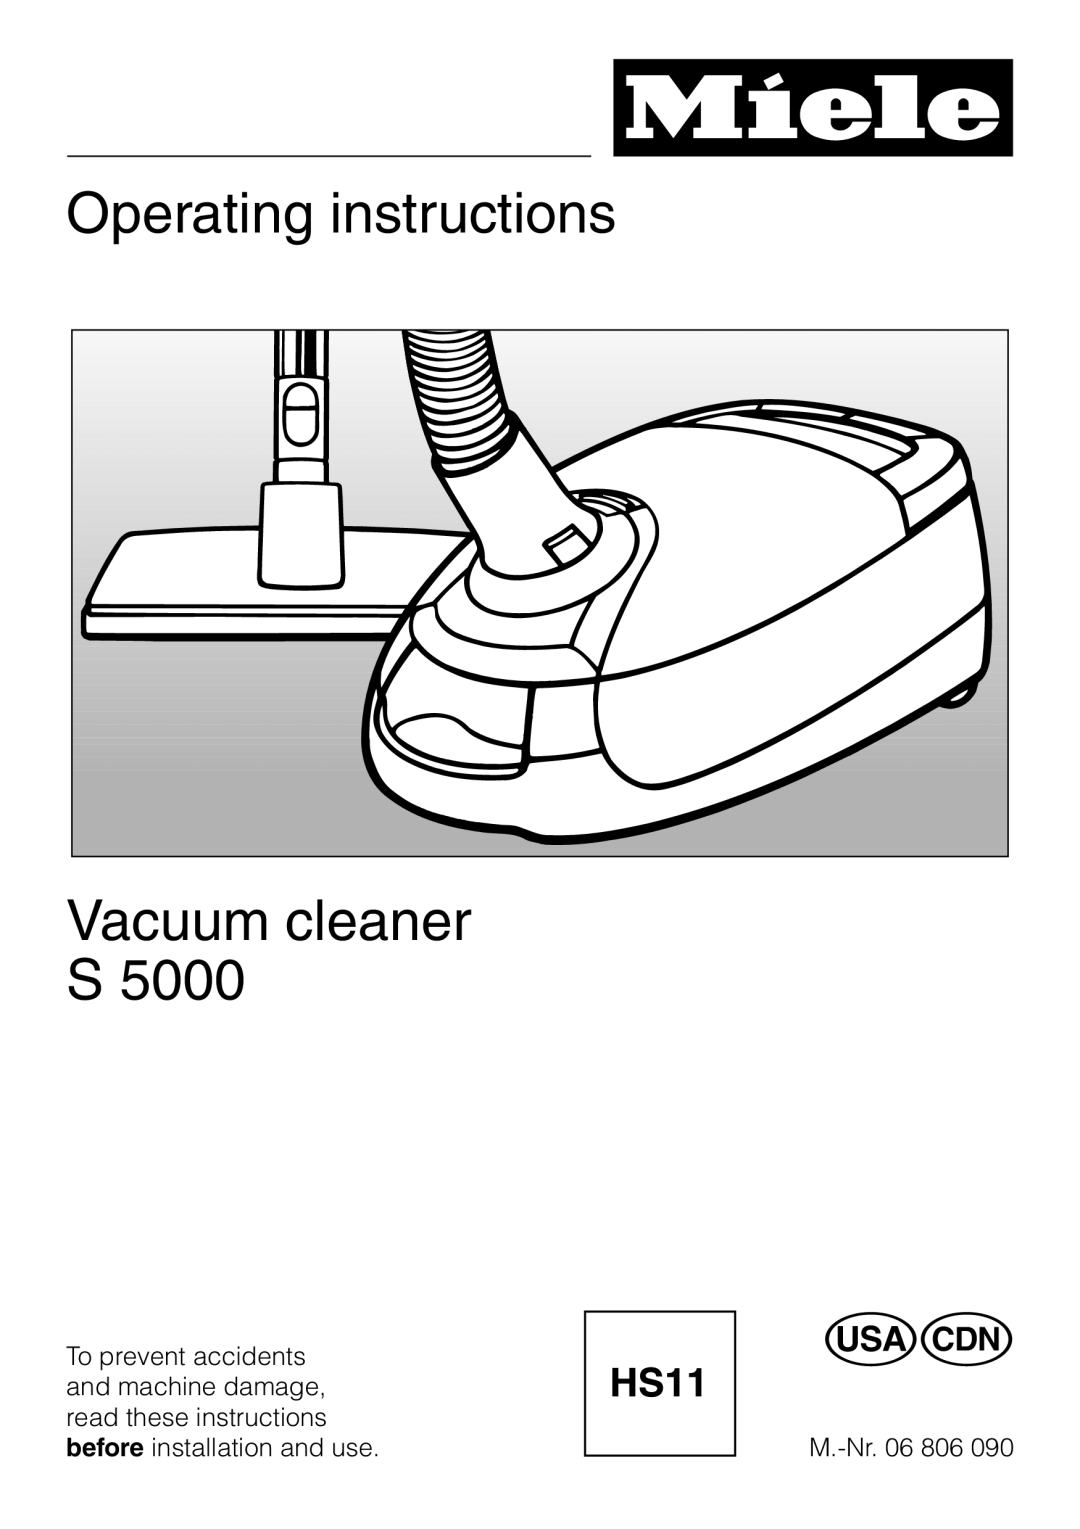 Miele S 5000 operating instructions Operating instructions Vacuum cleaner S 